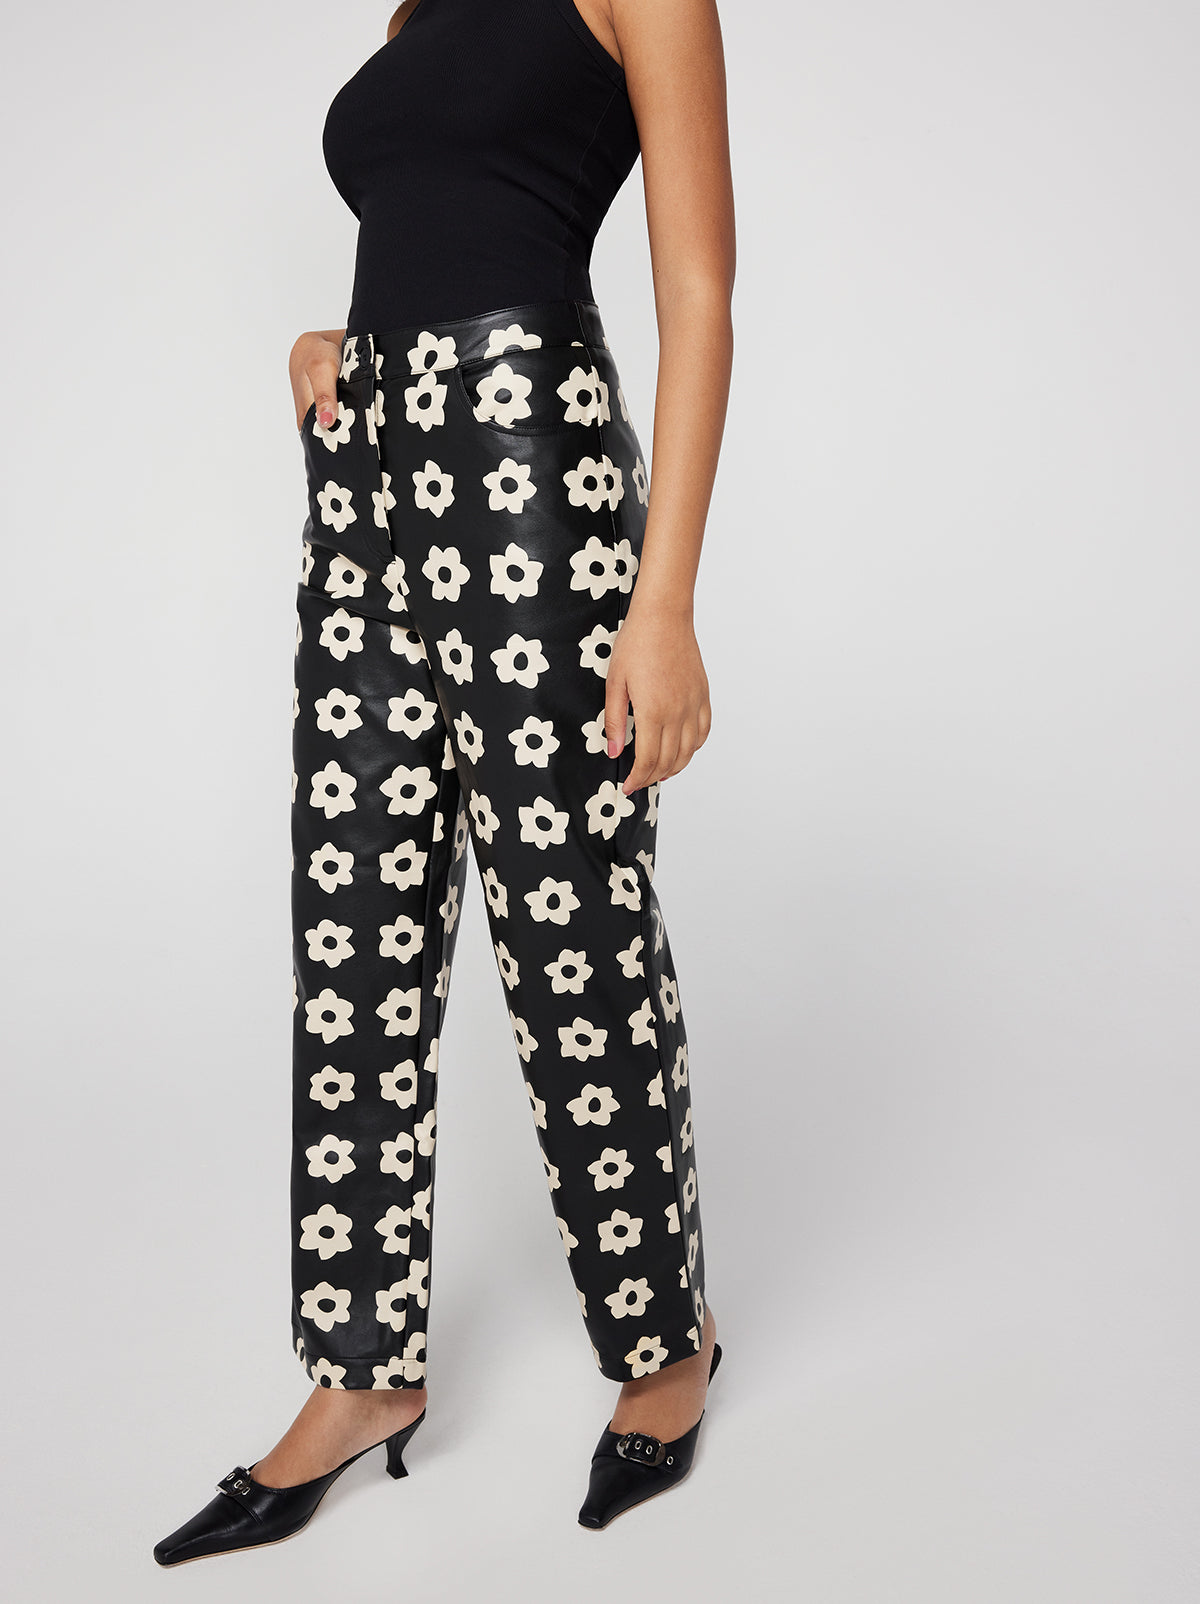 Janice Black Tiled Floral Trousers By KITRI Studio